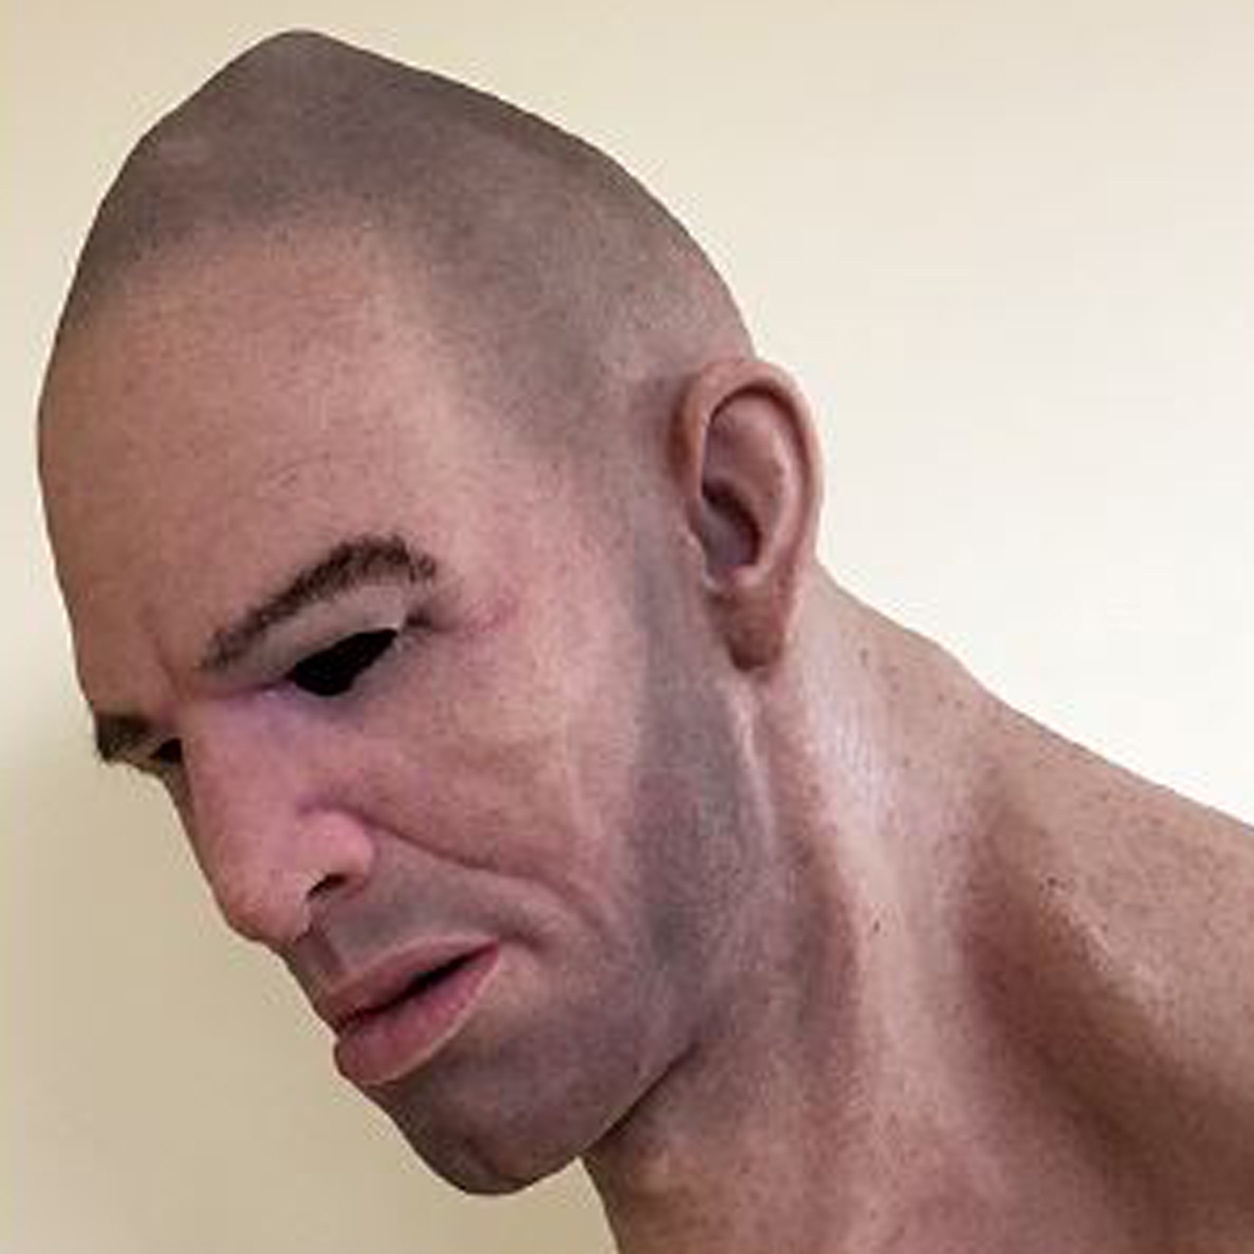 One of the hyper-realistic masks